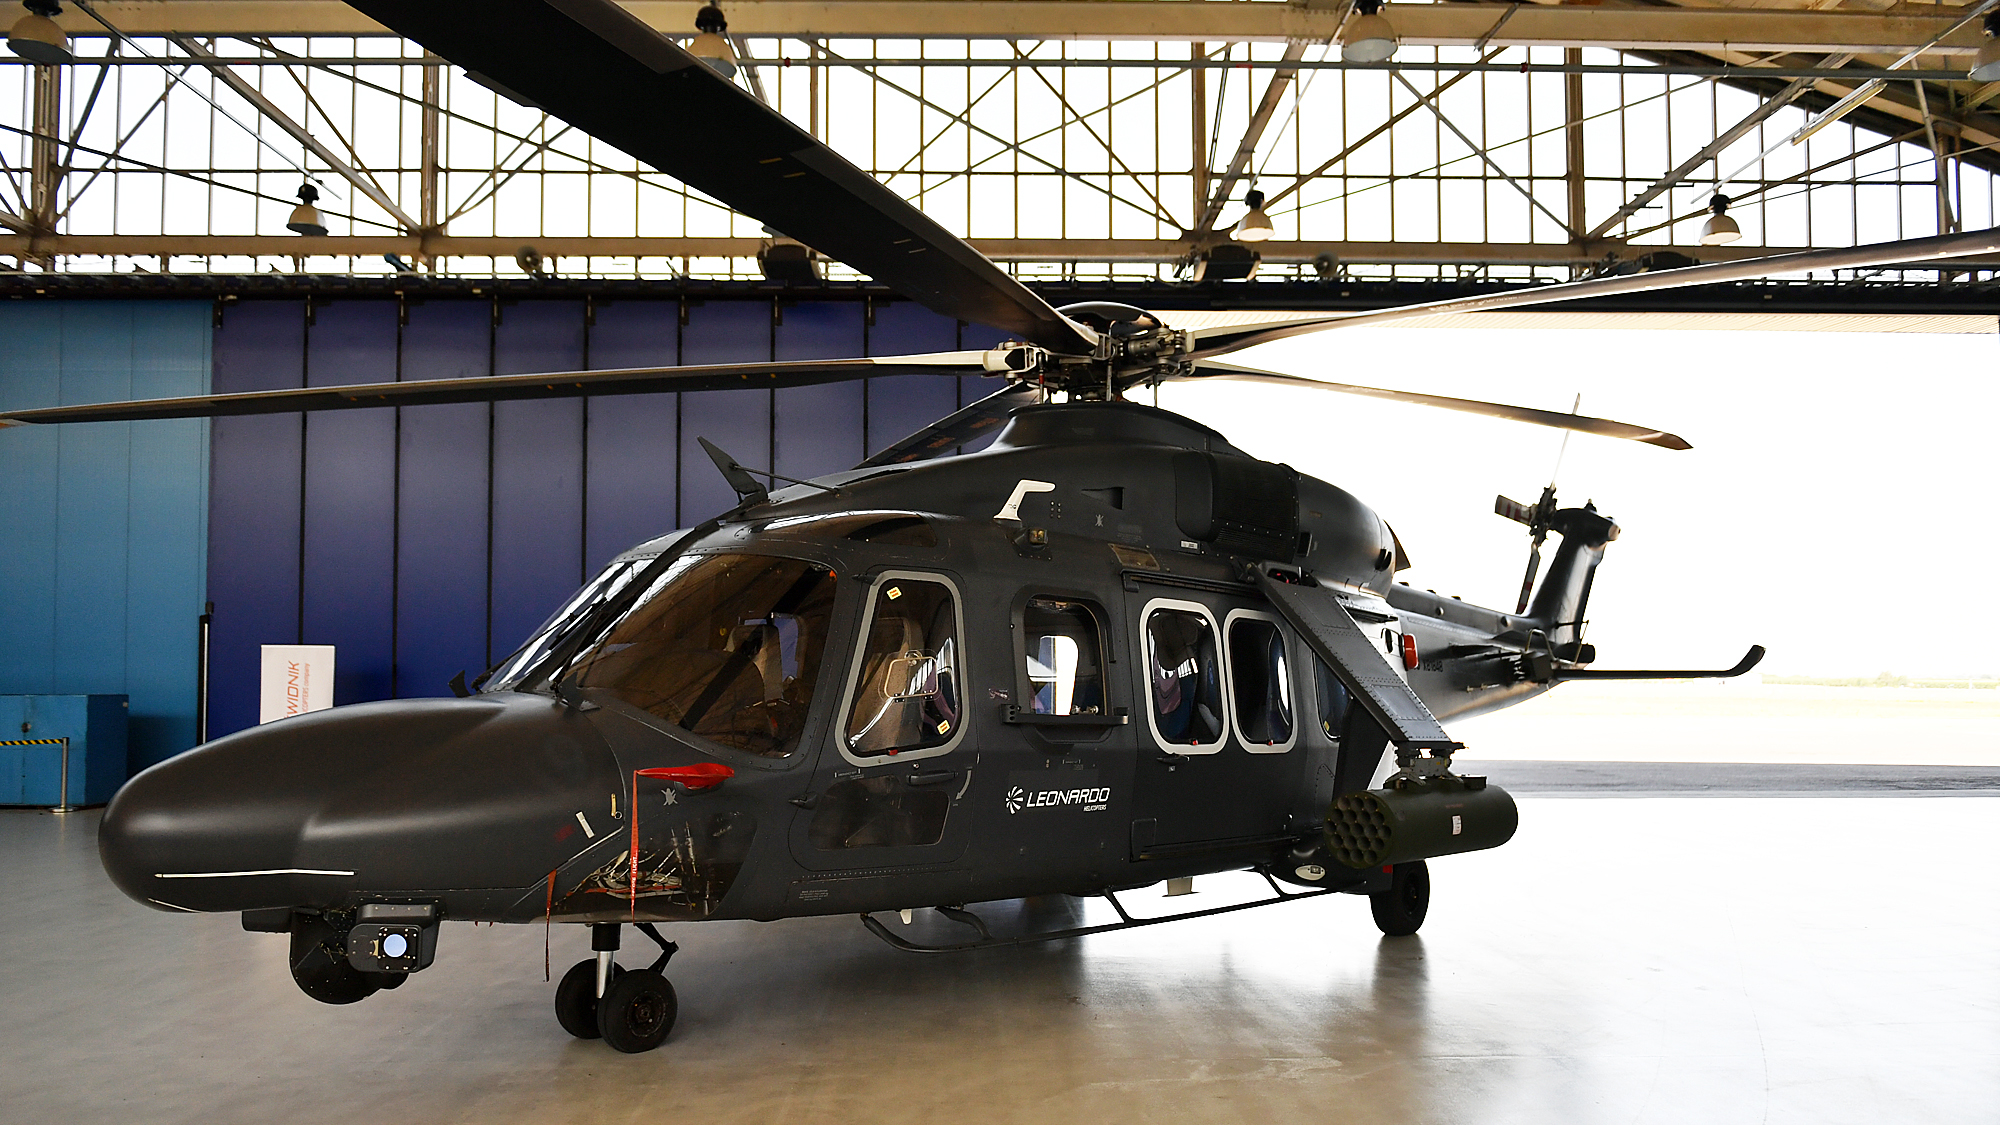 PZL-Swidnik Awarded Contract for Supply of 32 AW149 Helicopters for Polish Armed Forces